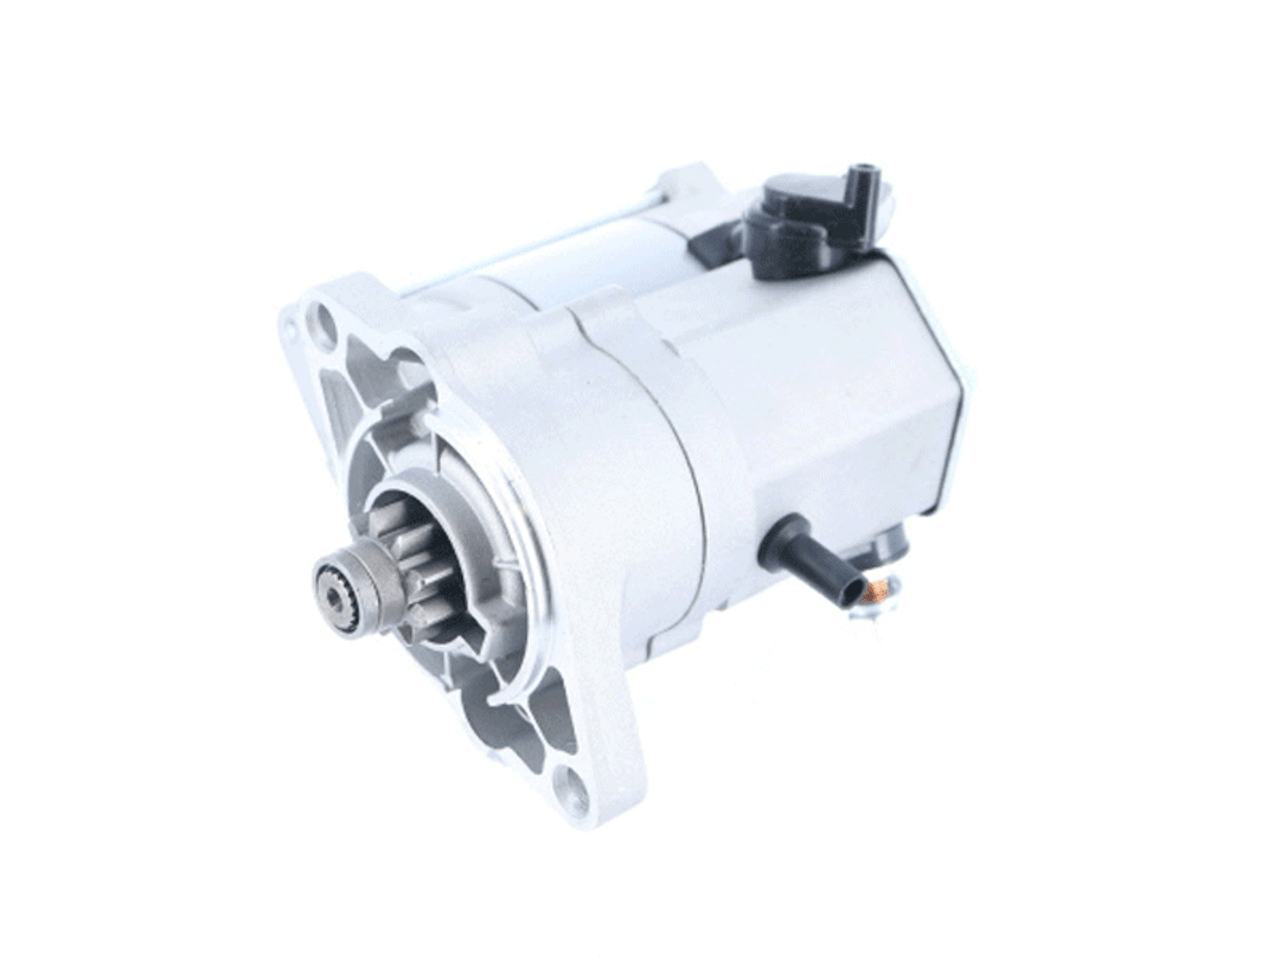 Electric Starter for Denso 1280005410, 1280005411, 9712809541, 128000-5410, 128000-5411, 9712809-541